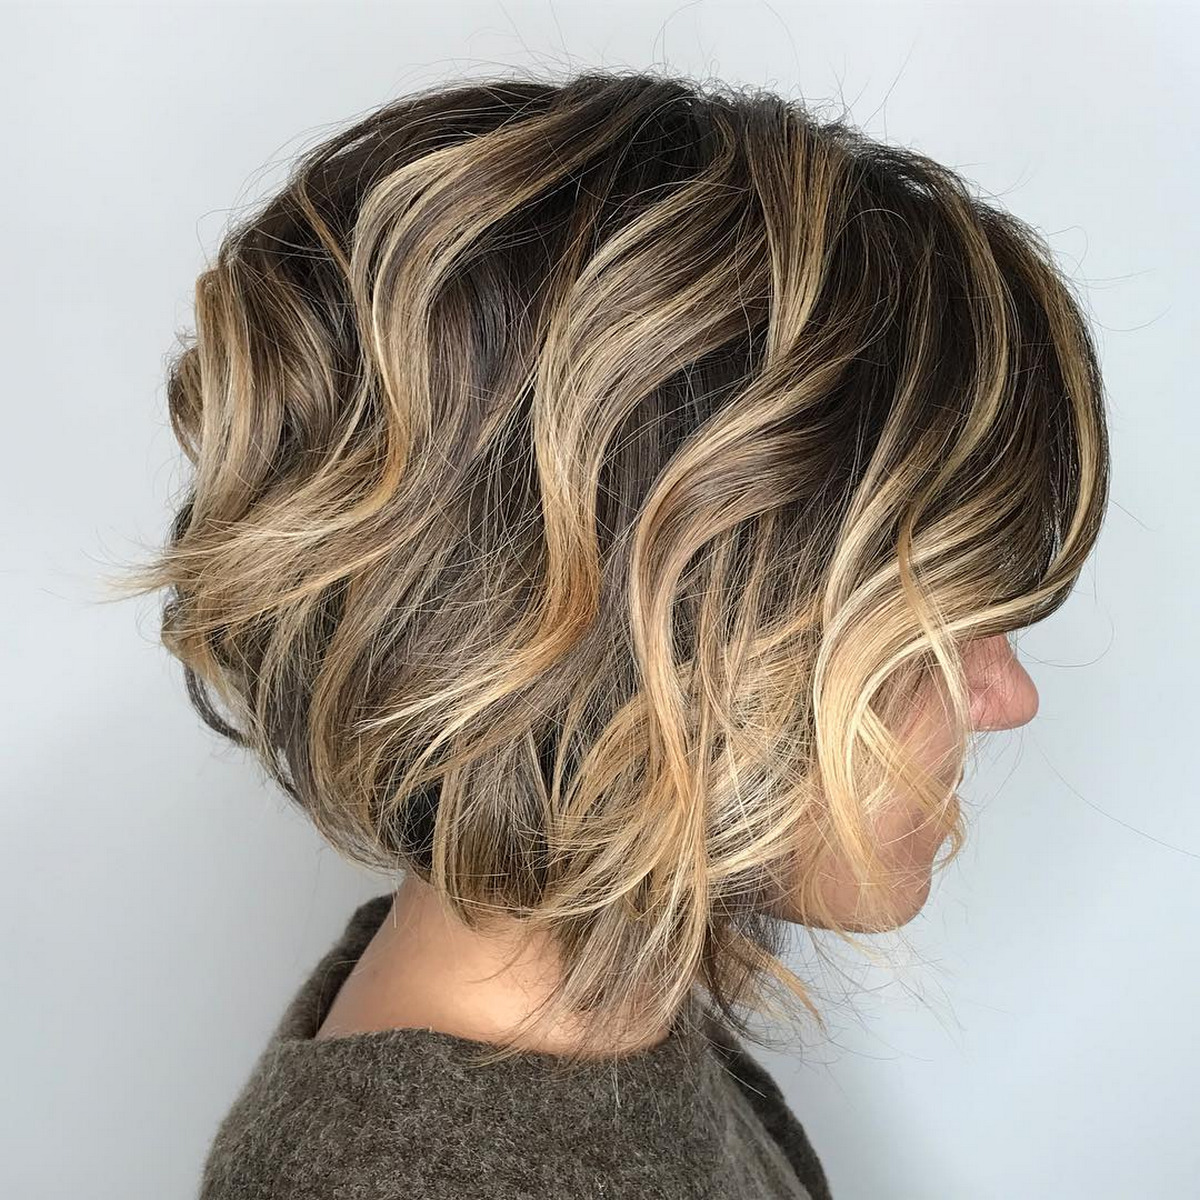 Curly Jaw-Length Bob With Choppy Layers